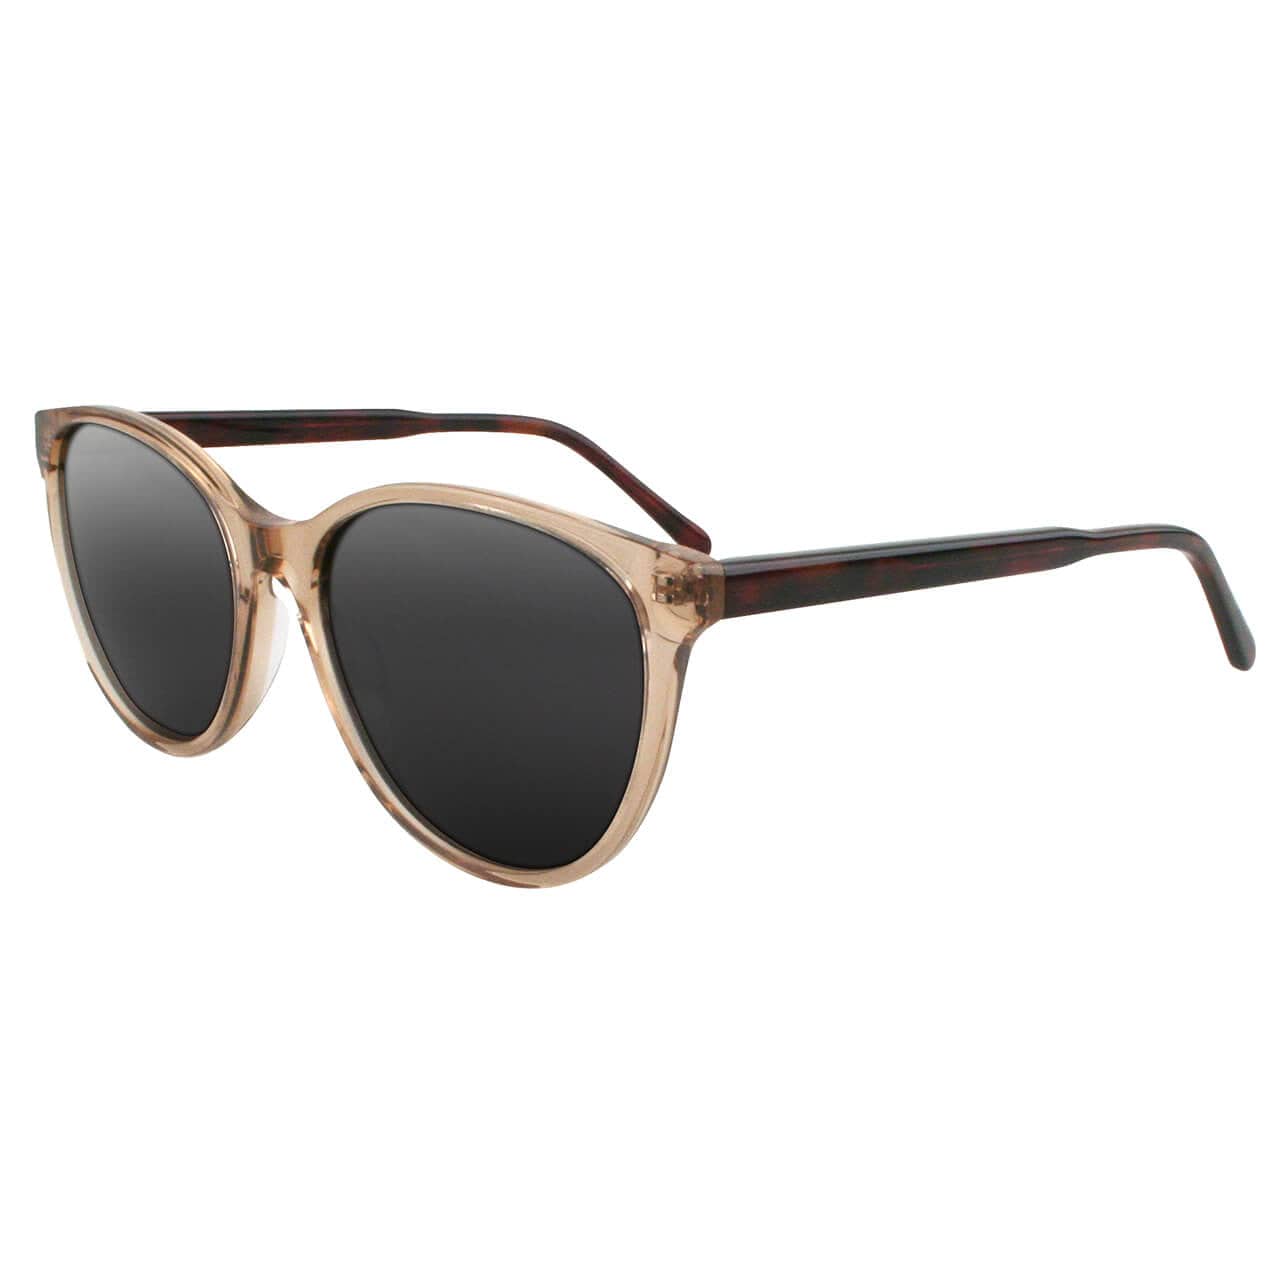 Solect Phase Sunglasses with Brown Frame and Gray Polarized Lenses